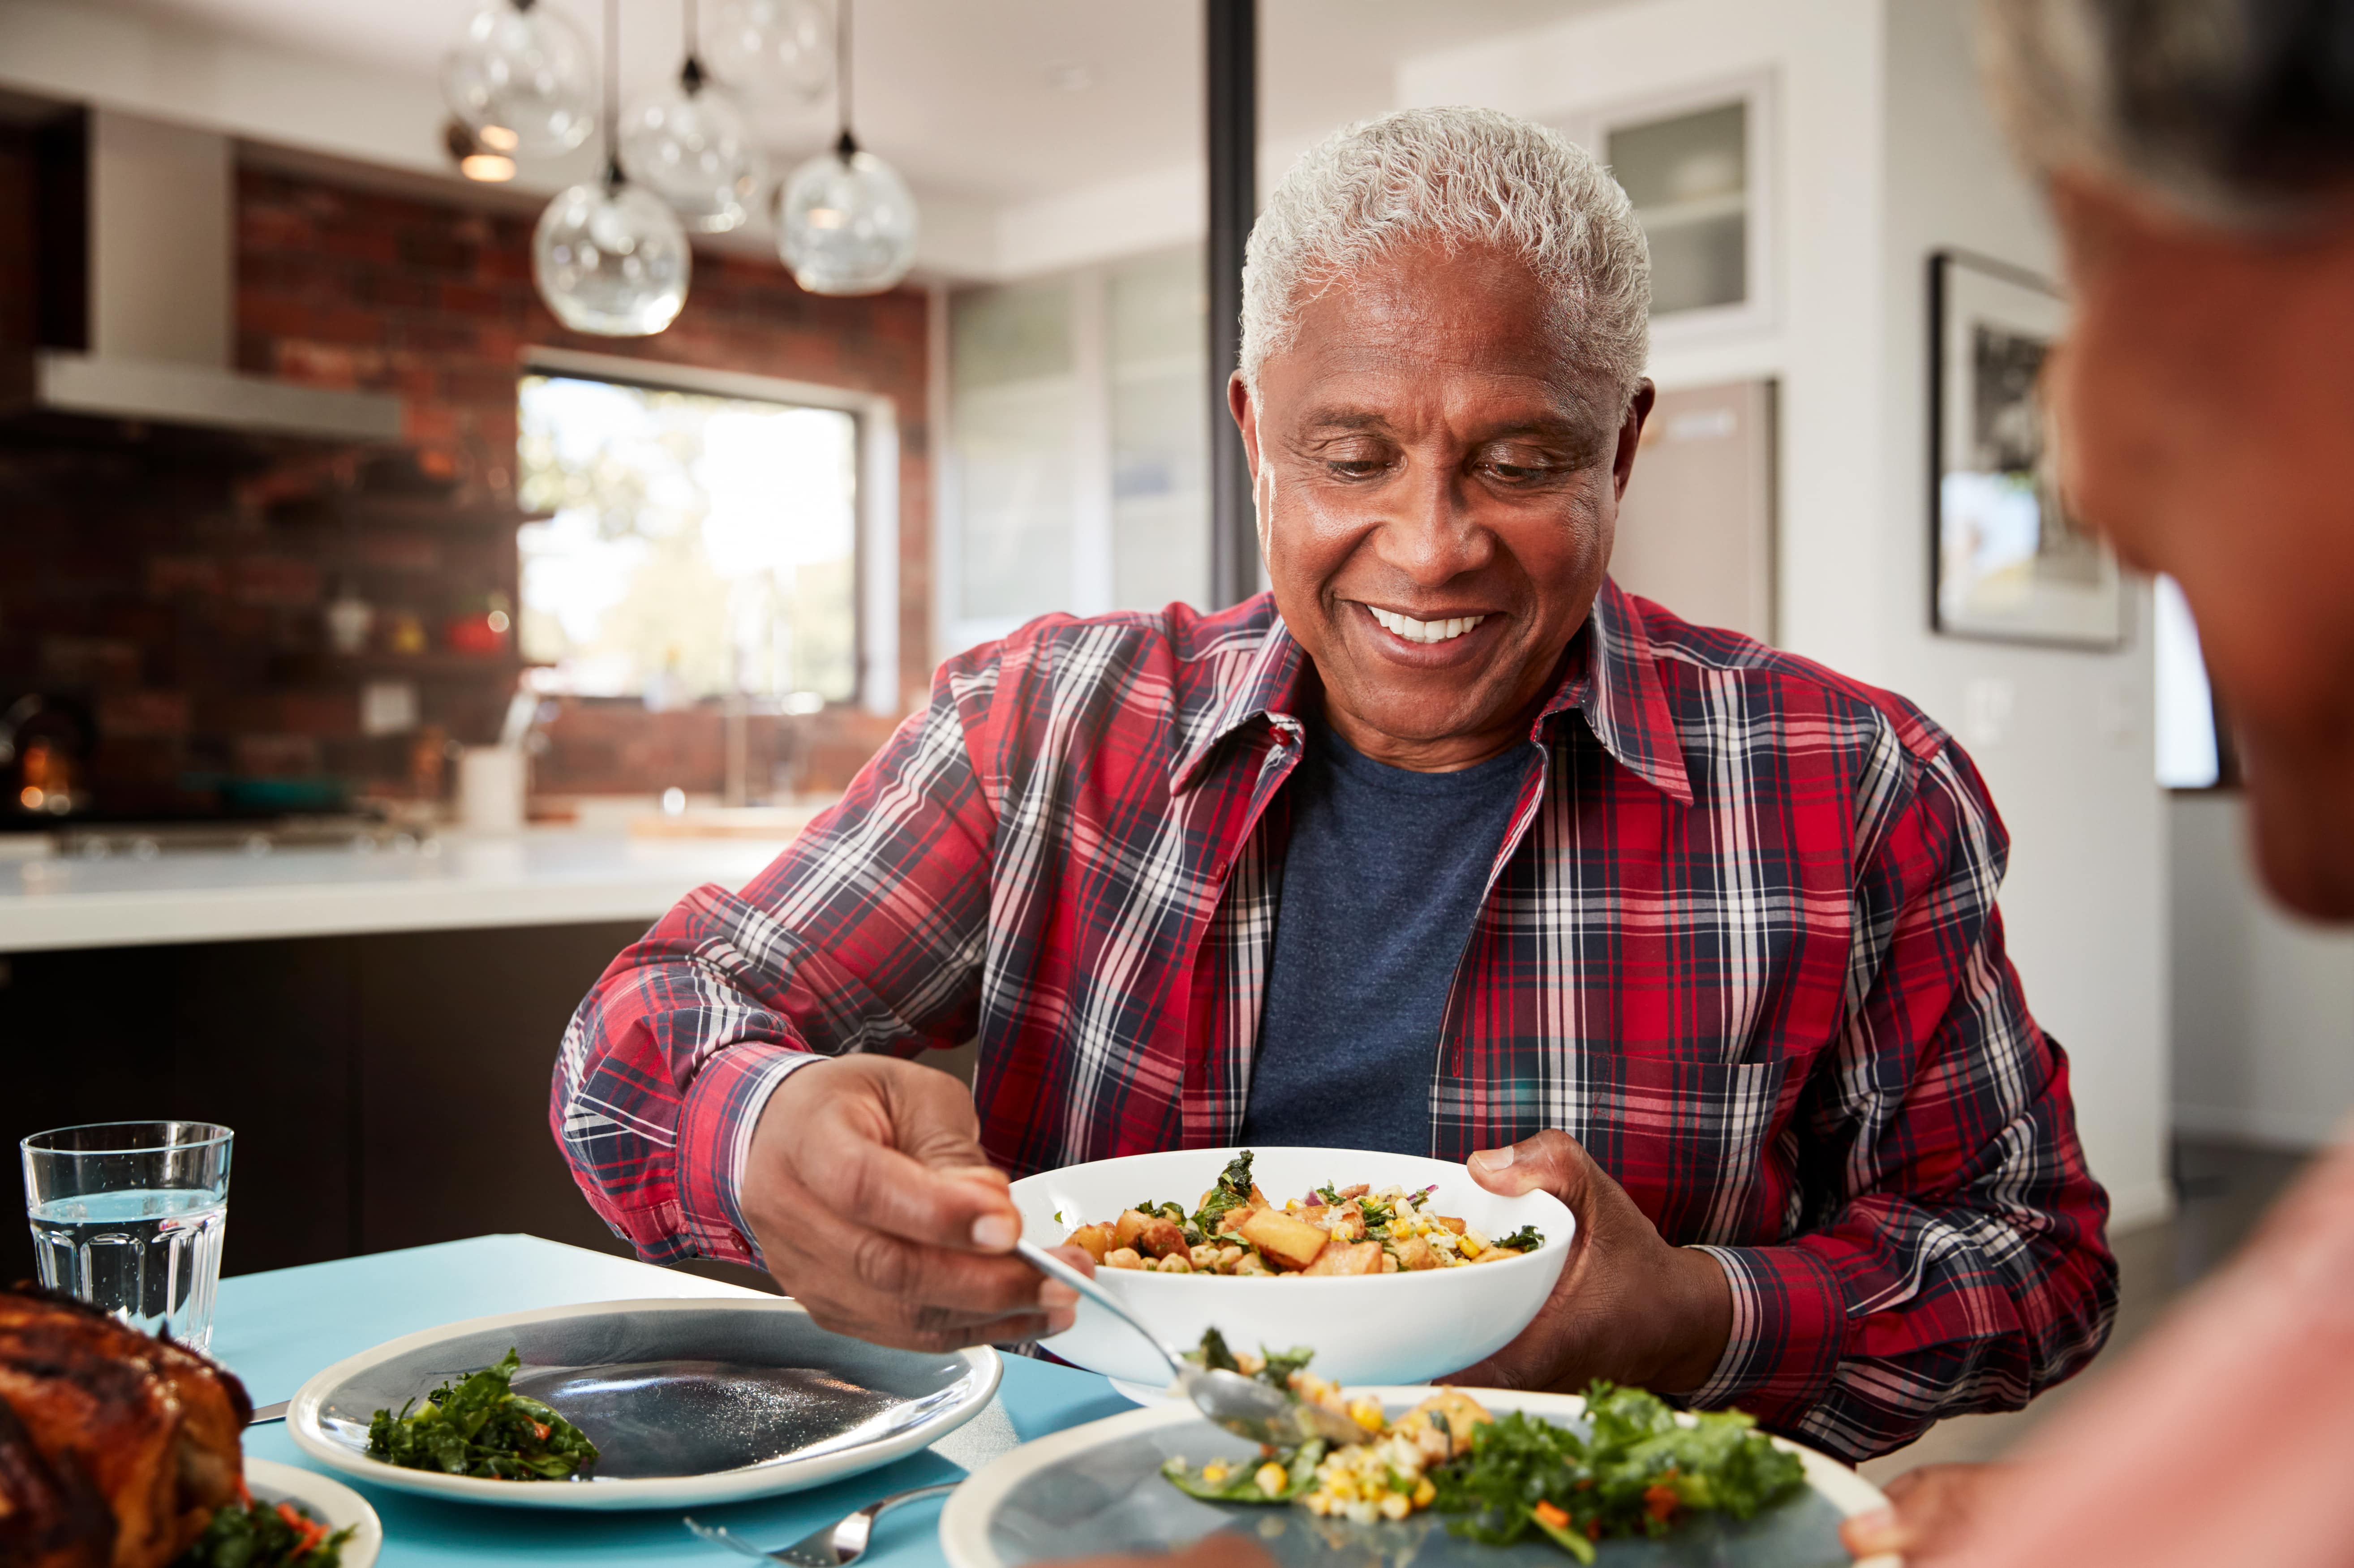 An older adult filling a family member's plate with a healthy salad 